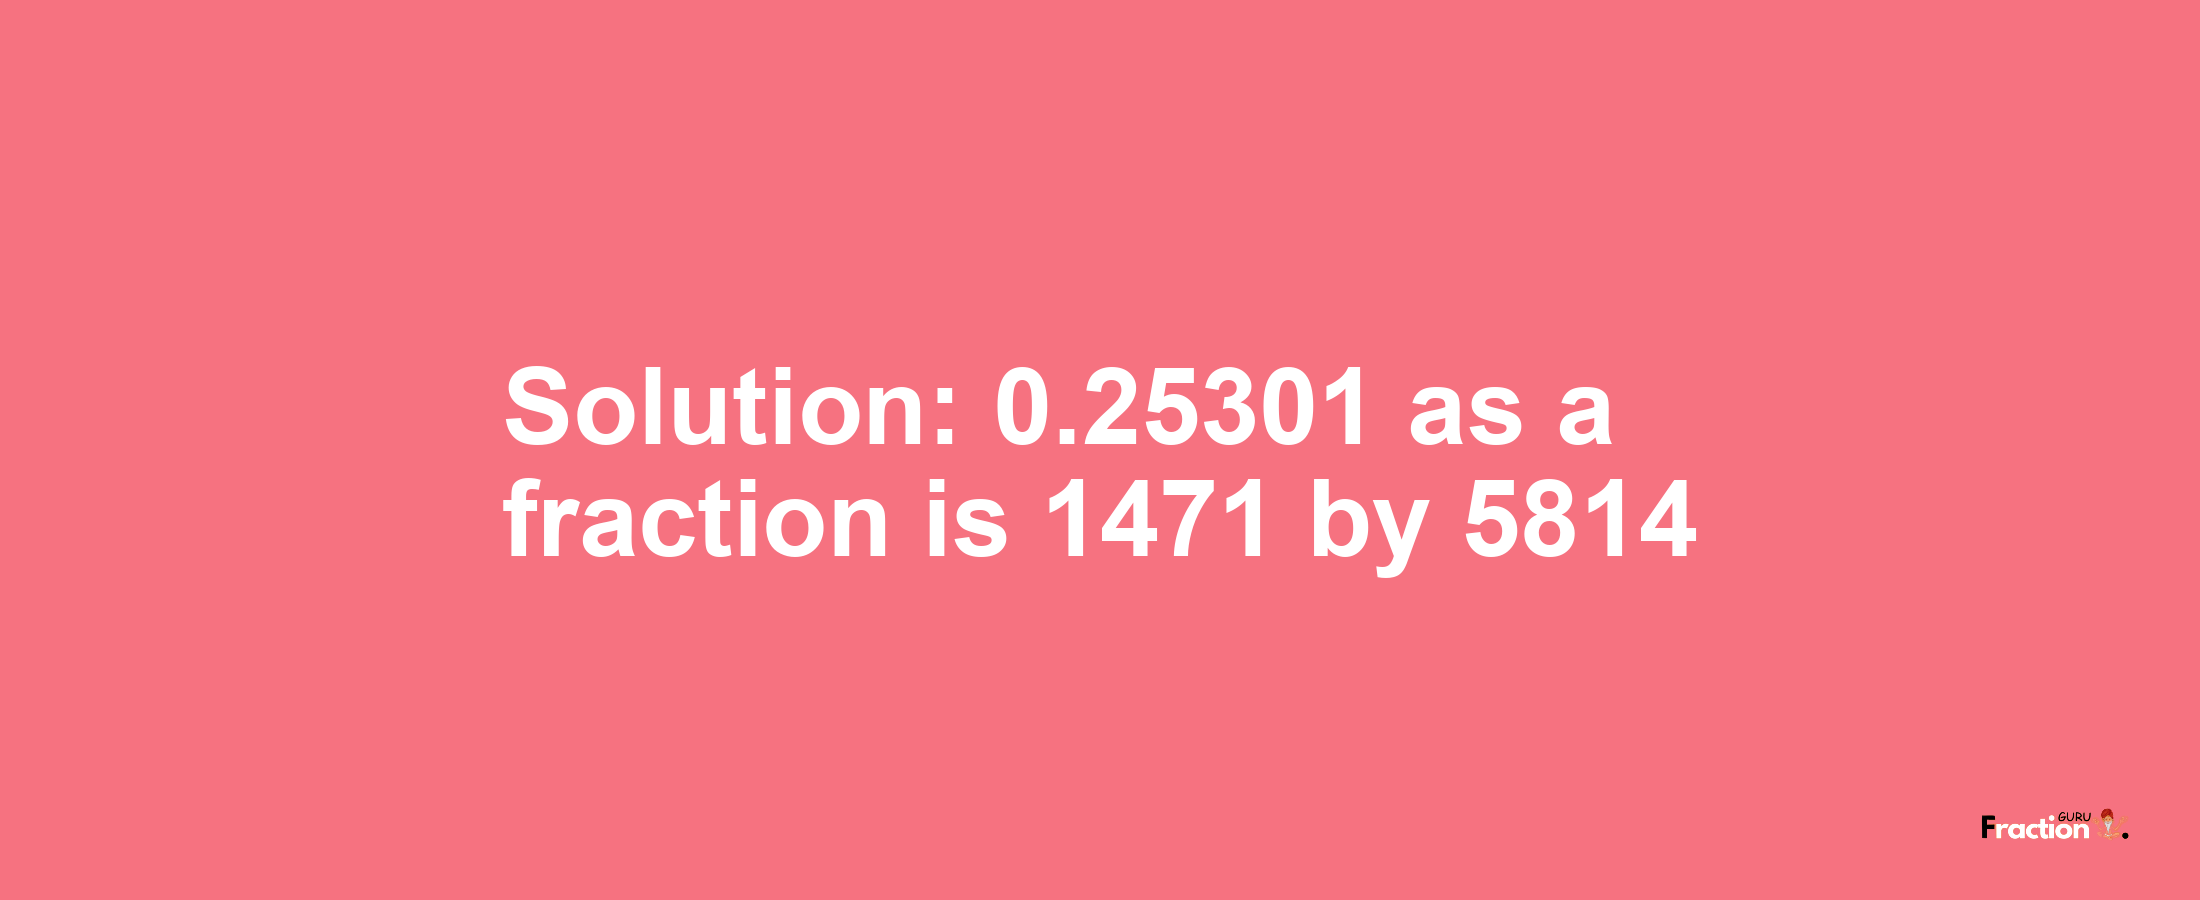 Solution:0.25301 as a fraction is 1471/5814